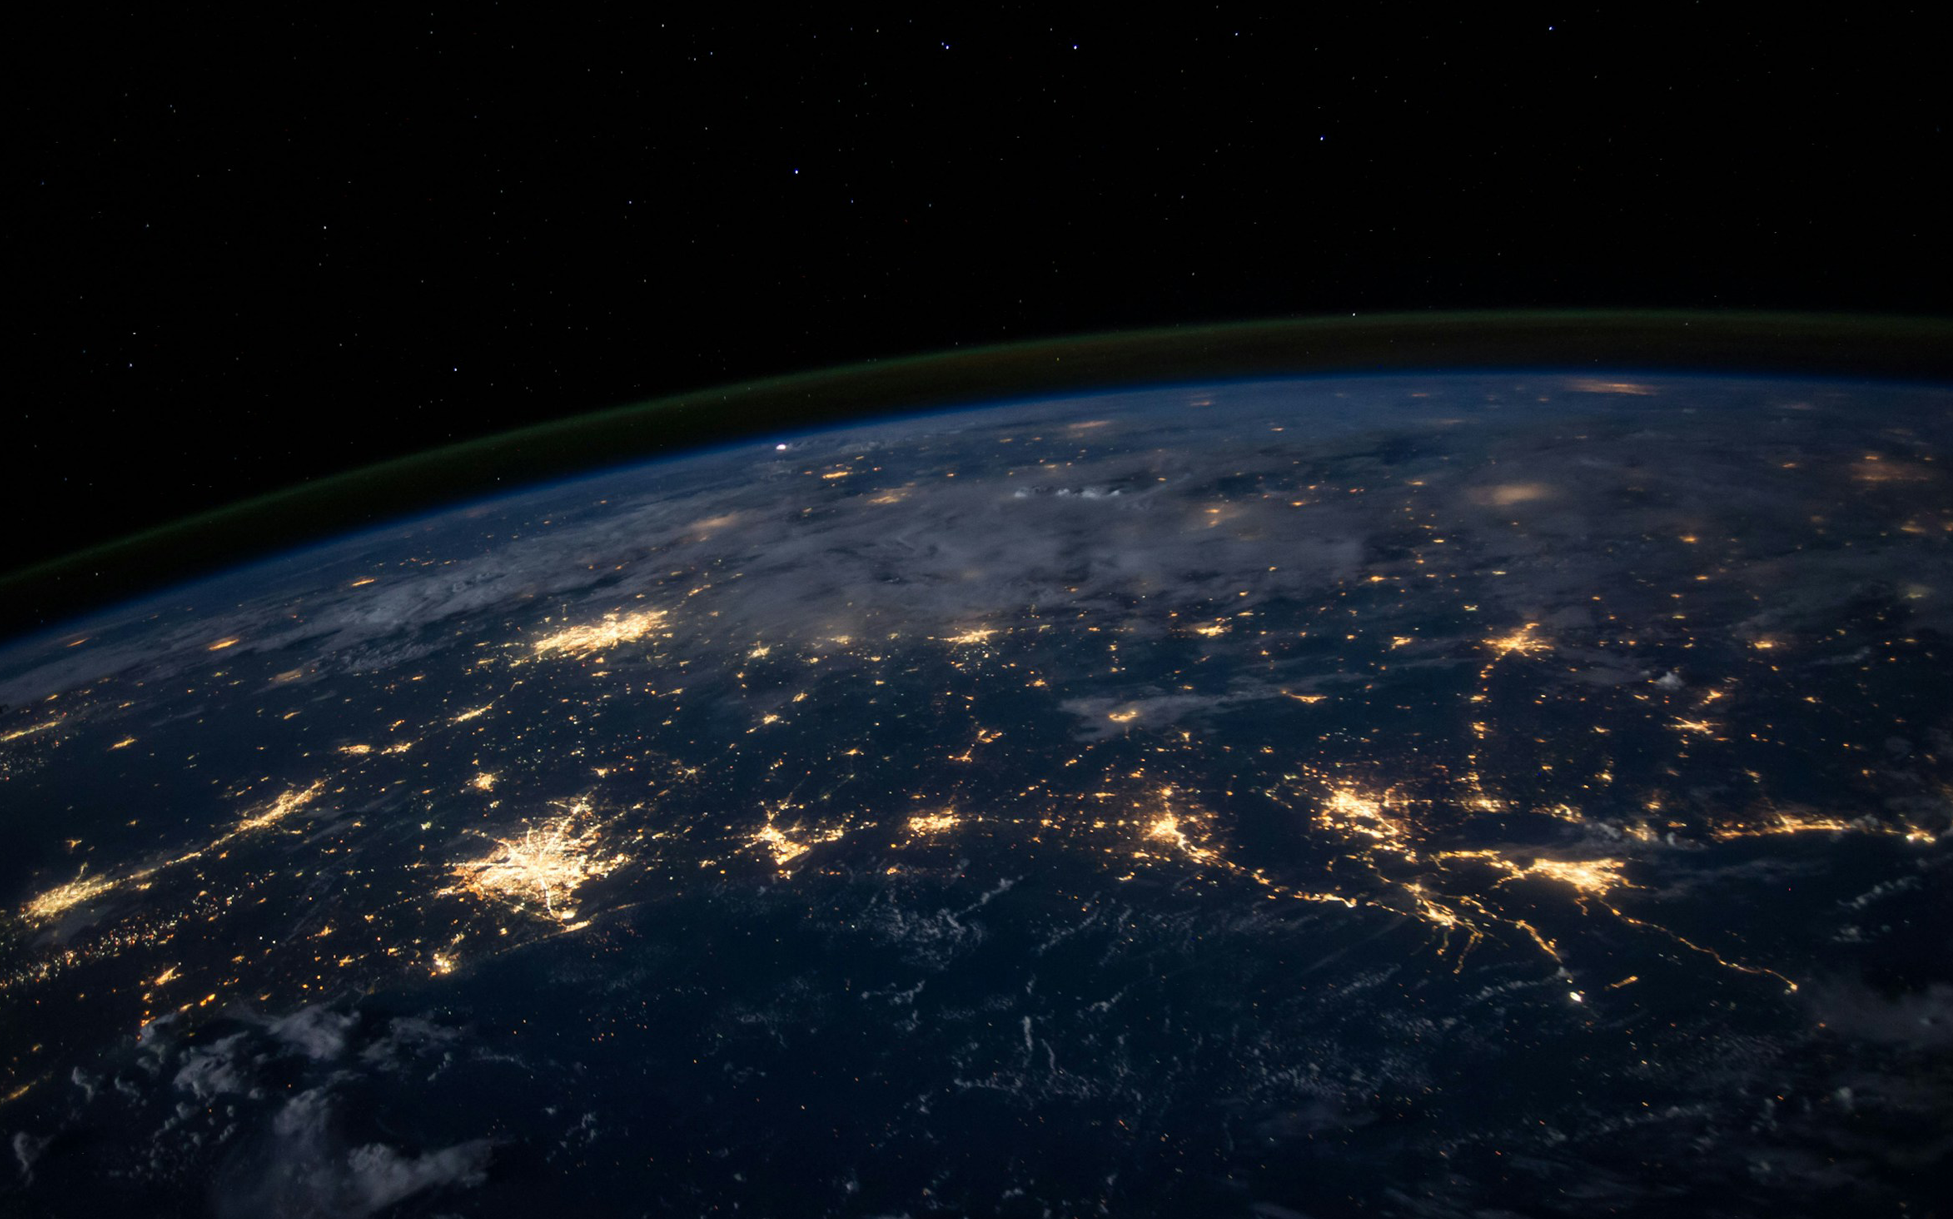 View of earth at night from space showing city lights, surrounded by darkness above.